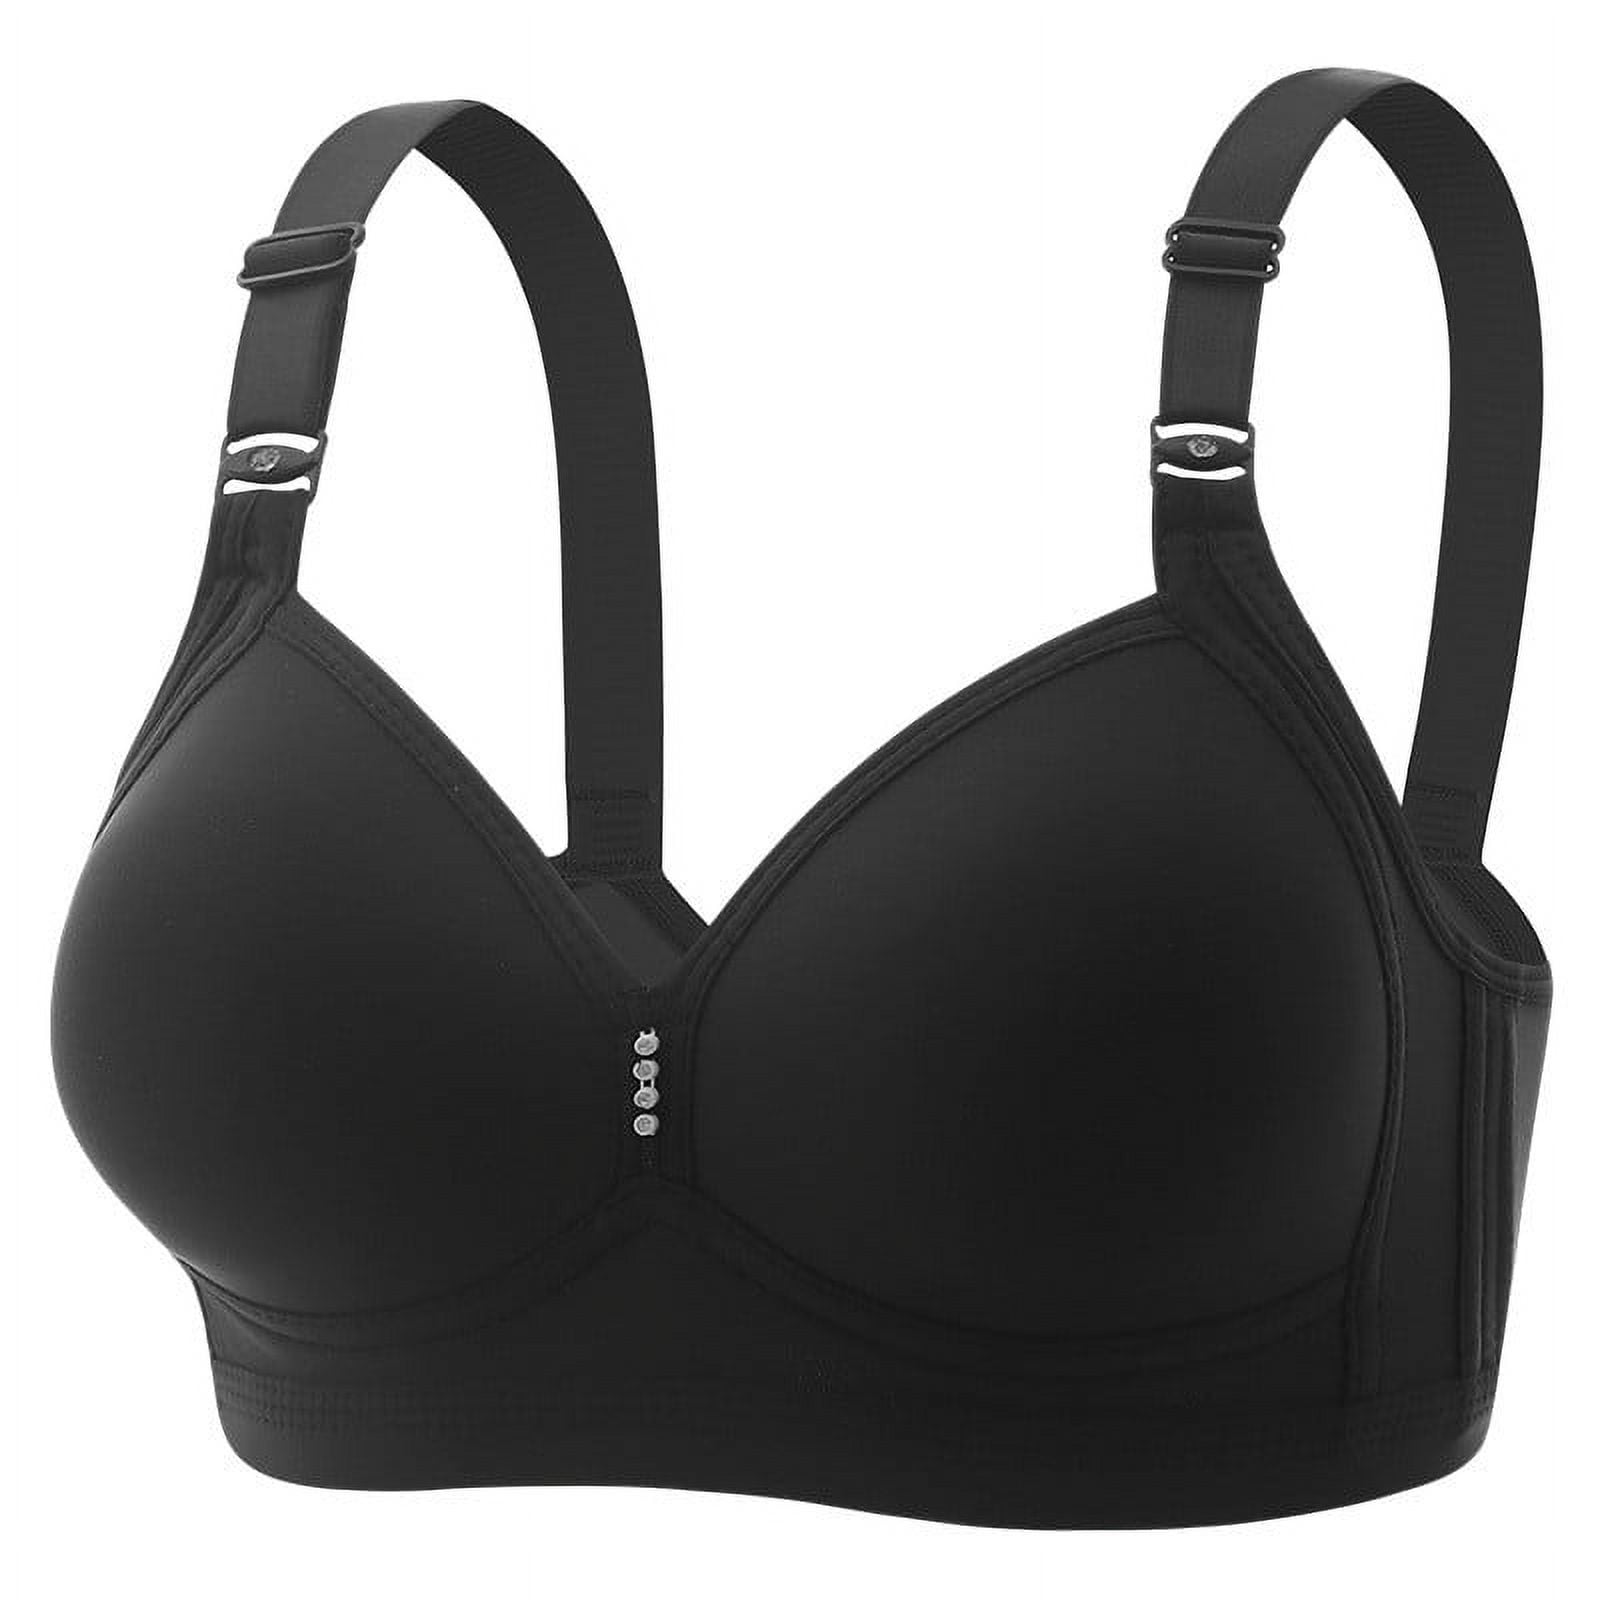 DACHAO Lingerie Seamless Bras For Women Soft Cup Sleeping Active Bra Push  Up Bralette Shakeproof Fitness Female Brassiere